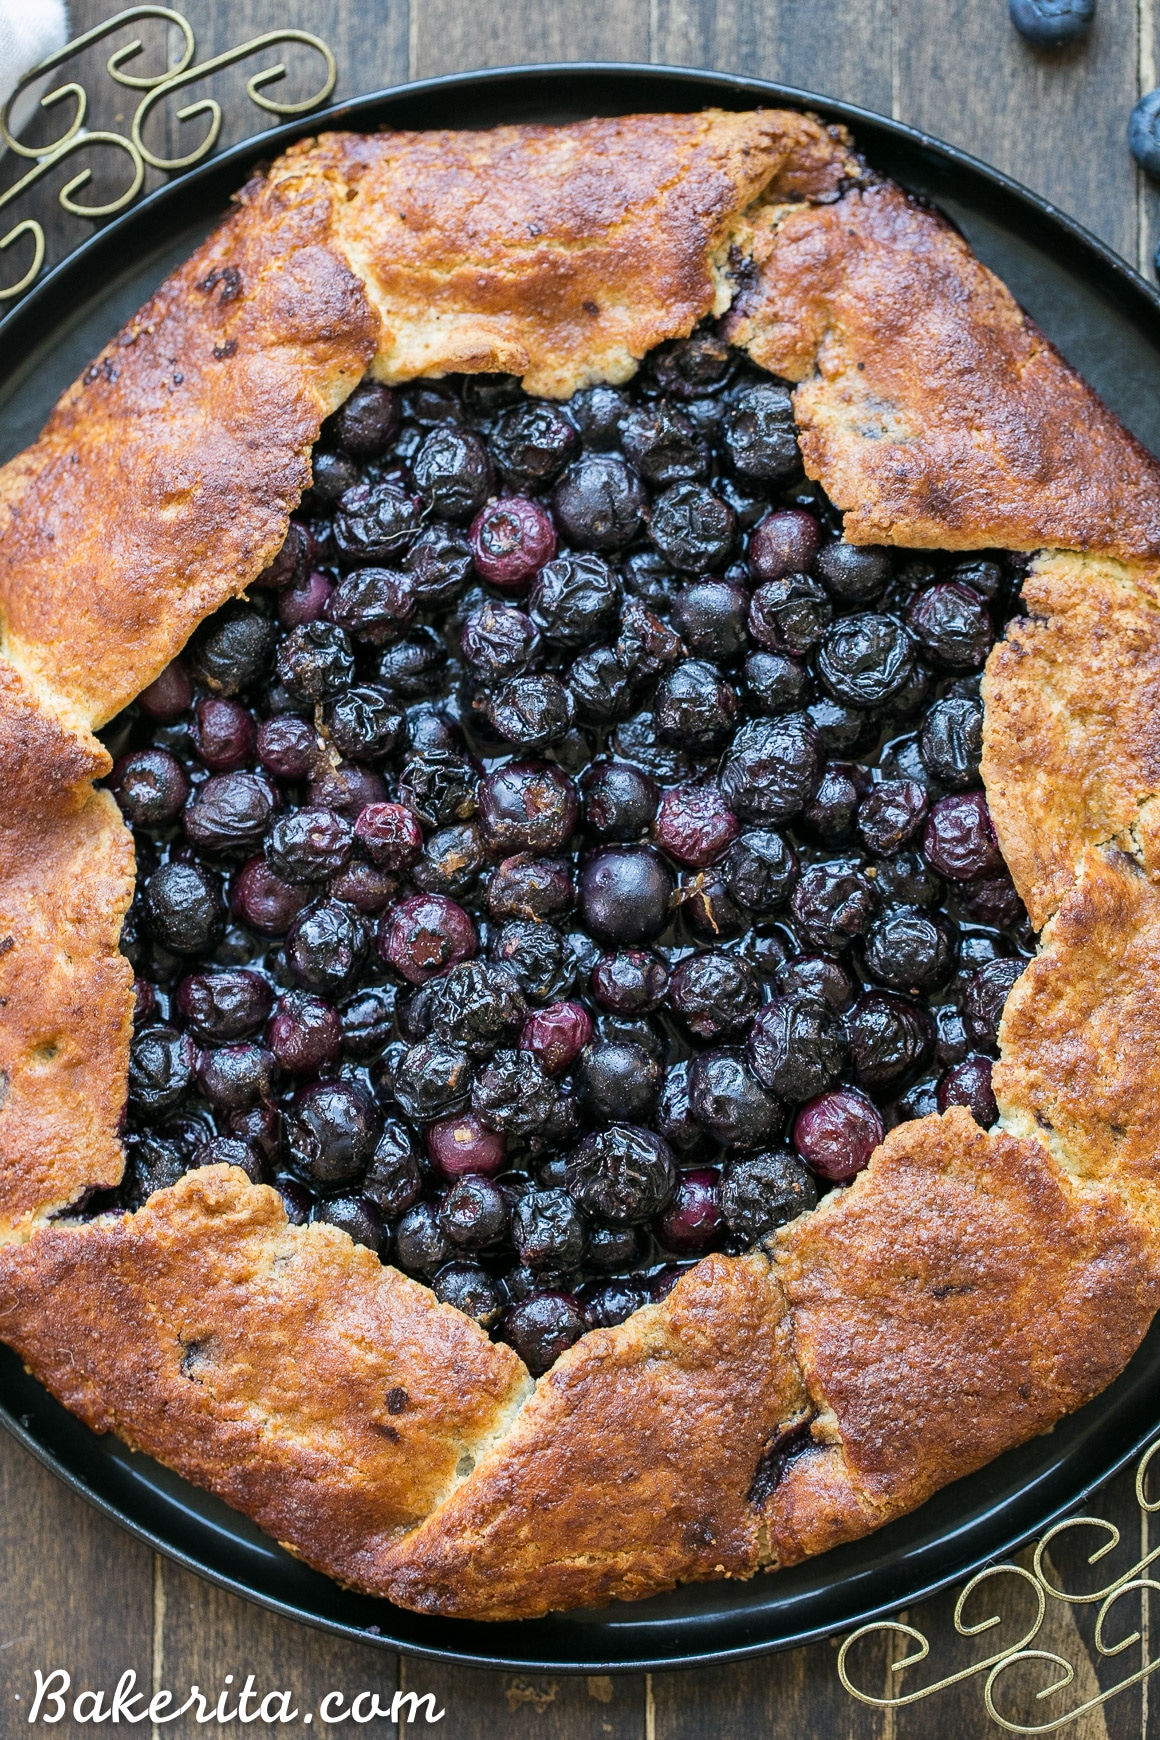 This Blueberry Galette is a delicious dessert that's easier to make than a pie, with the same fruity filling and super flaky crust. This healthier dessert is gluten free, Paleo-friendly, and refined sugar free.